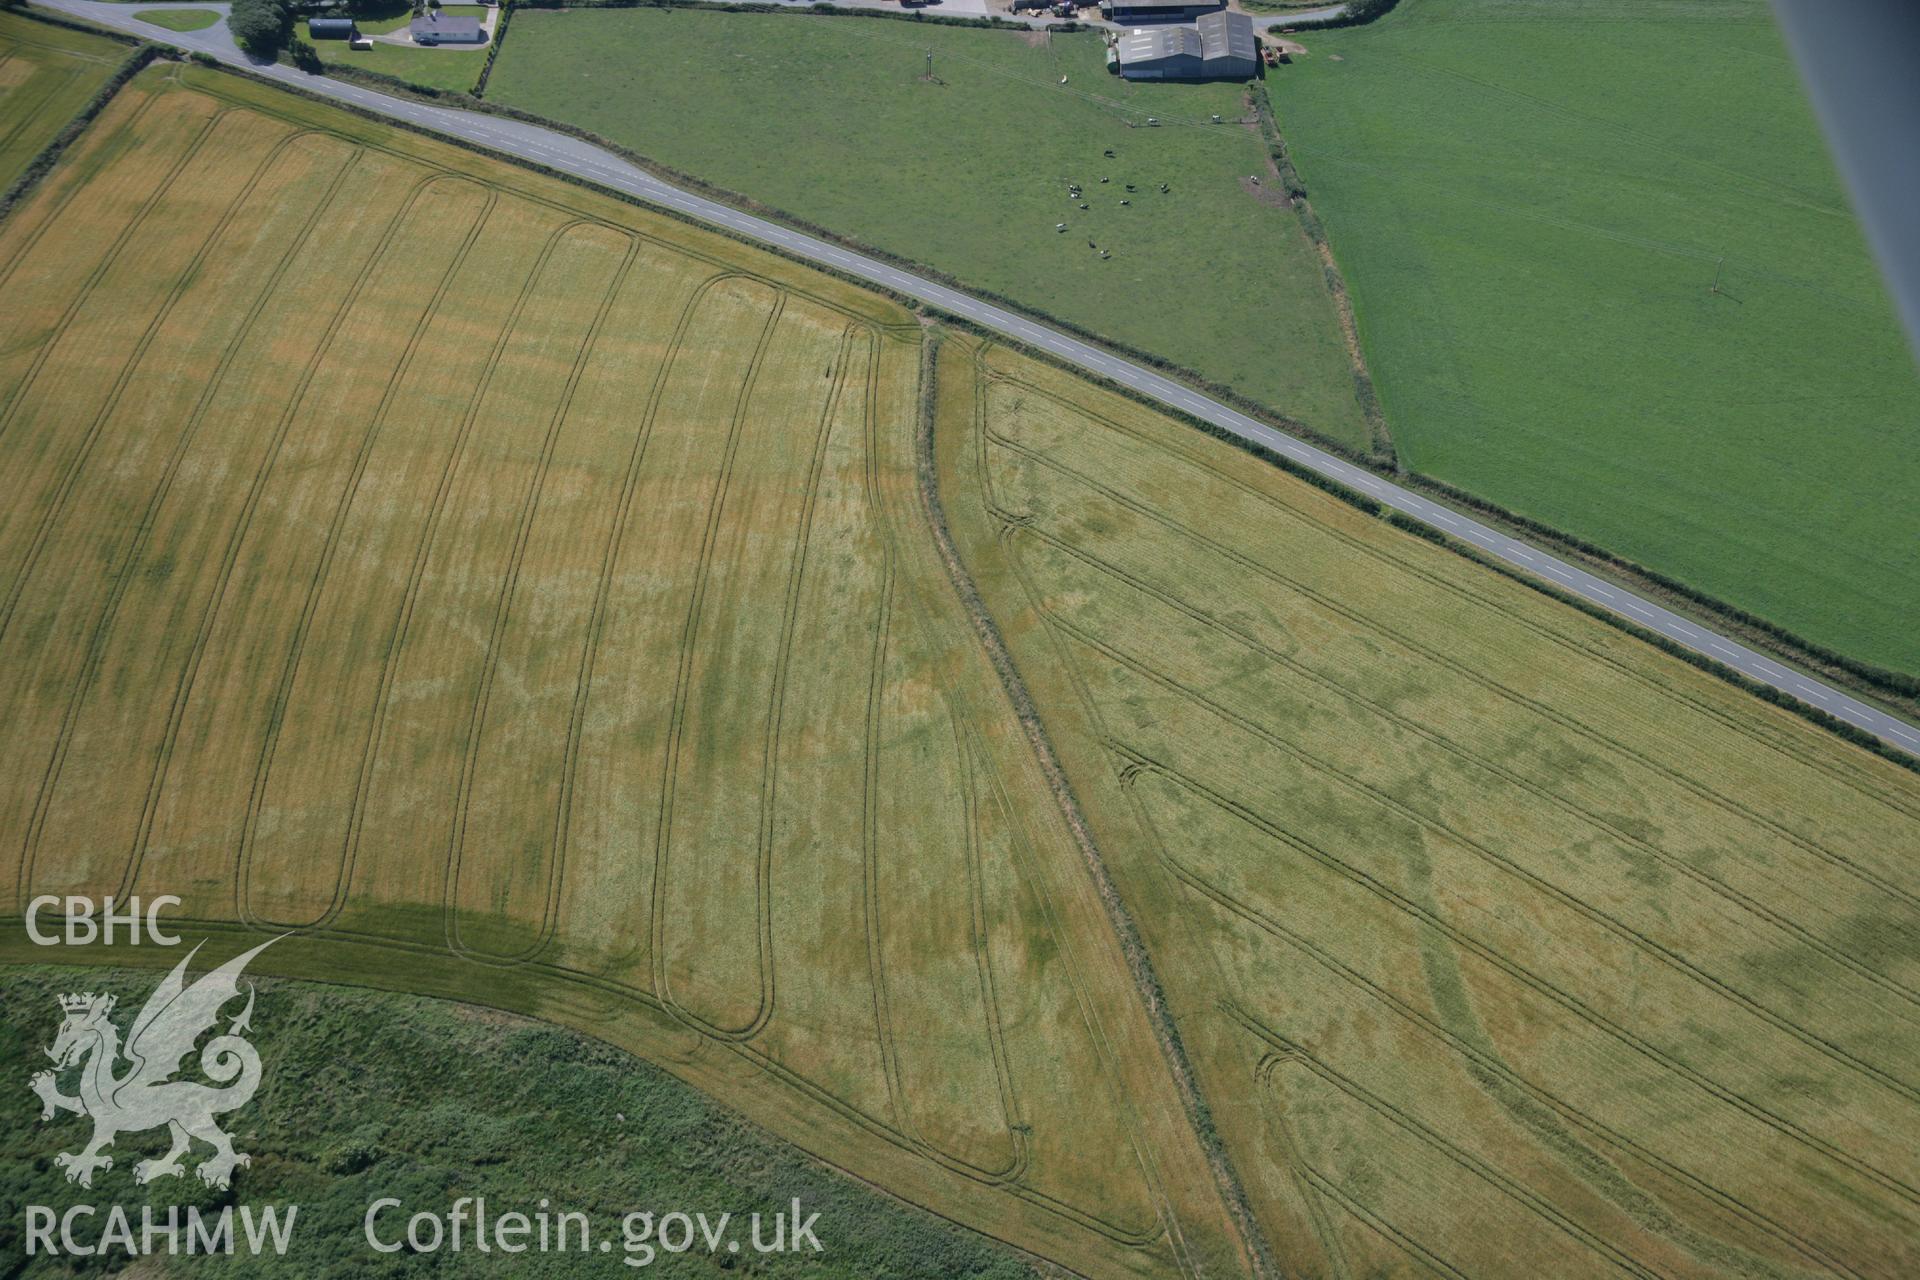 RCAHMW colour oblique aerial photograph of a cropmark enclosure at Pointz Castle. Taken on 14 July 2006 by Toby Driver.